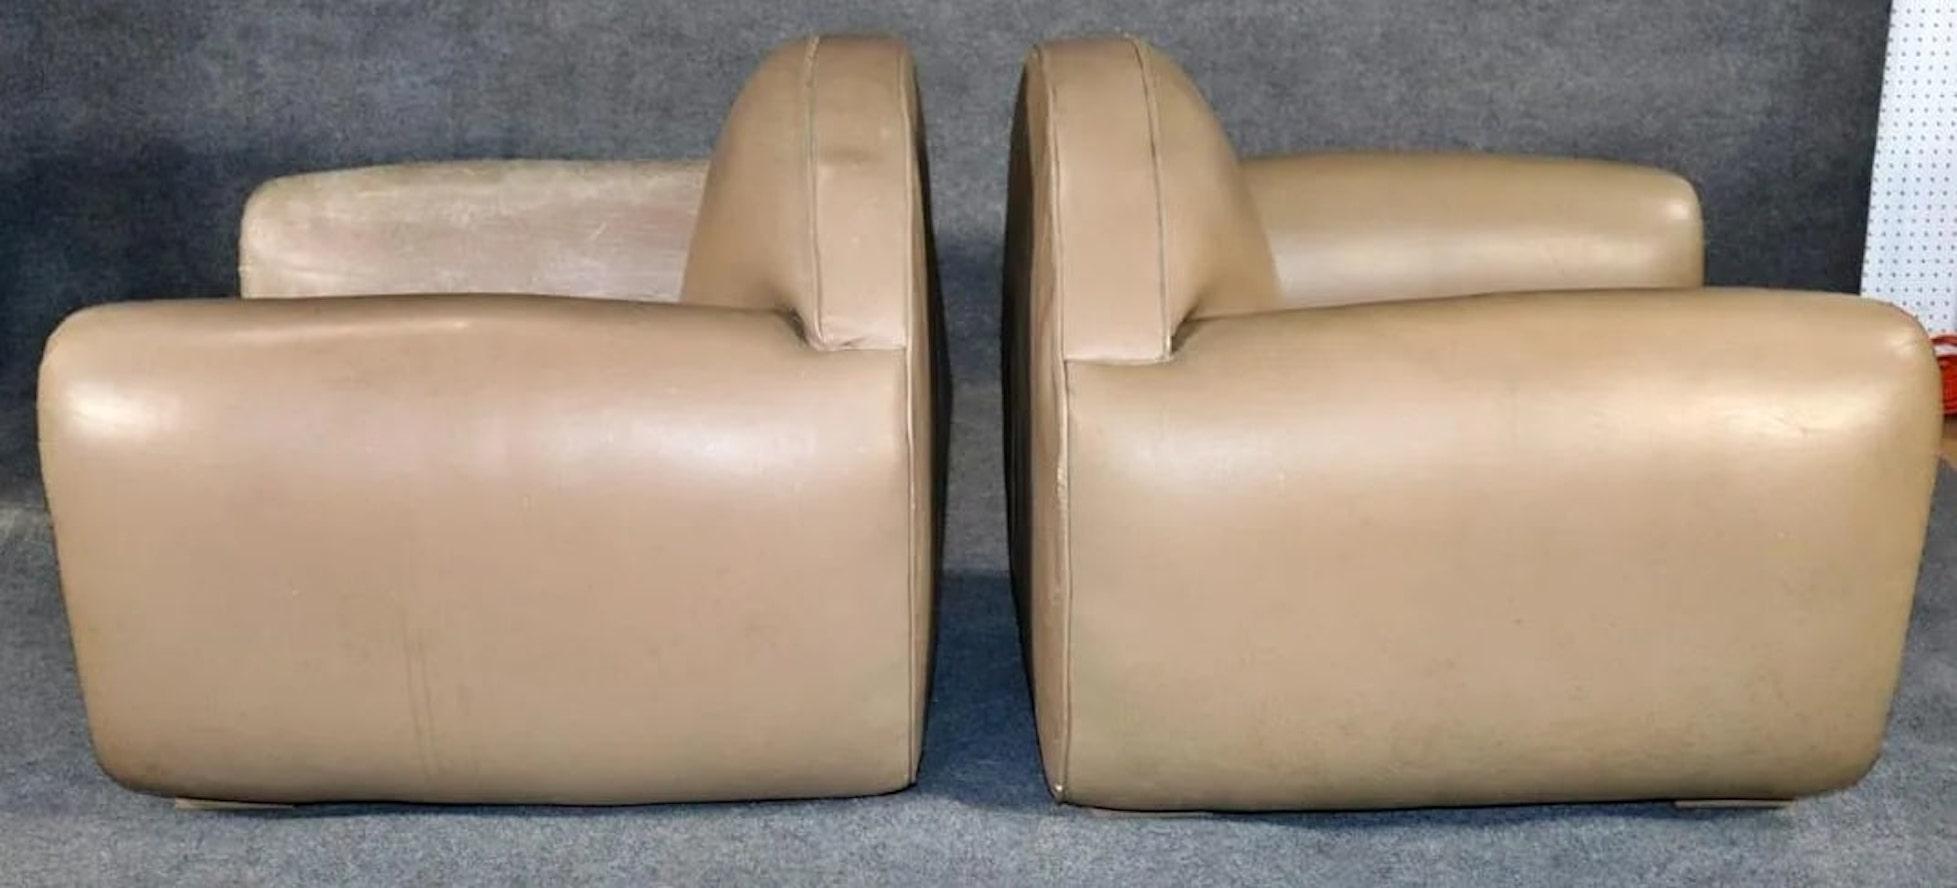 Art Deco Vintage Leather Club Chairs For Sale